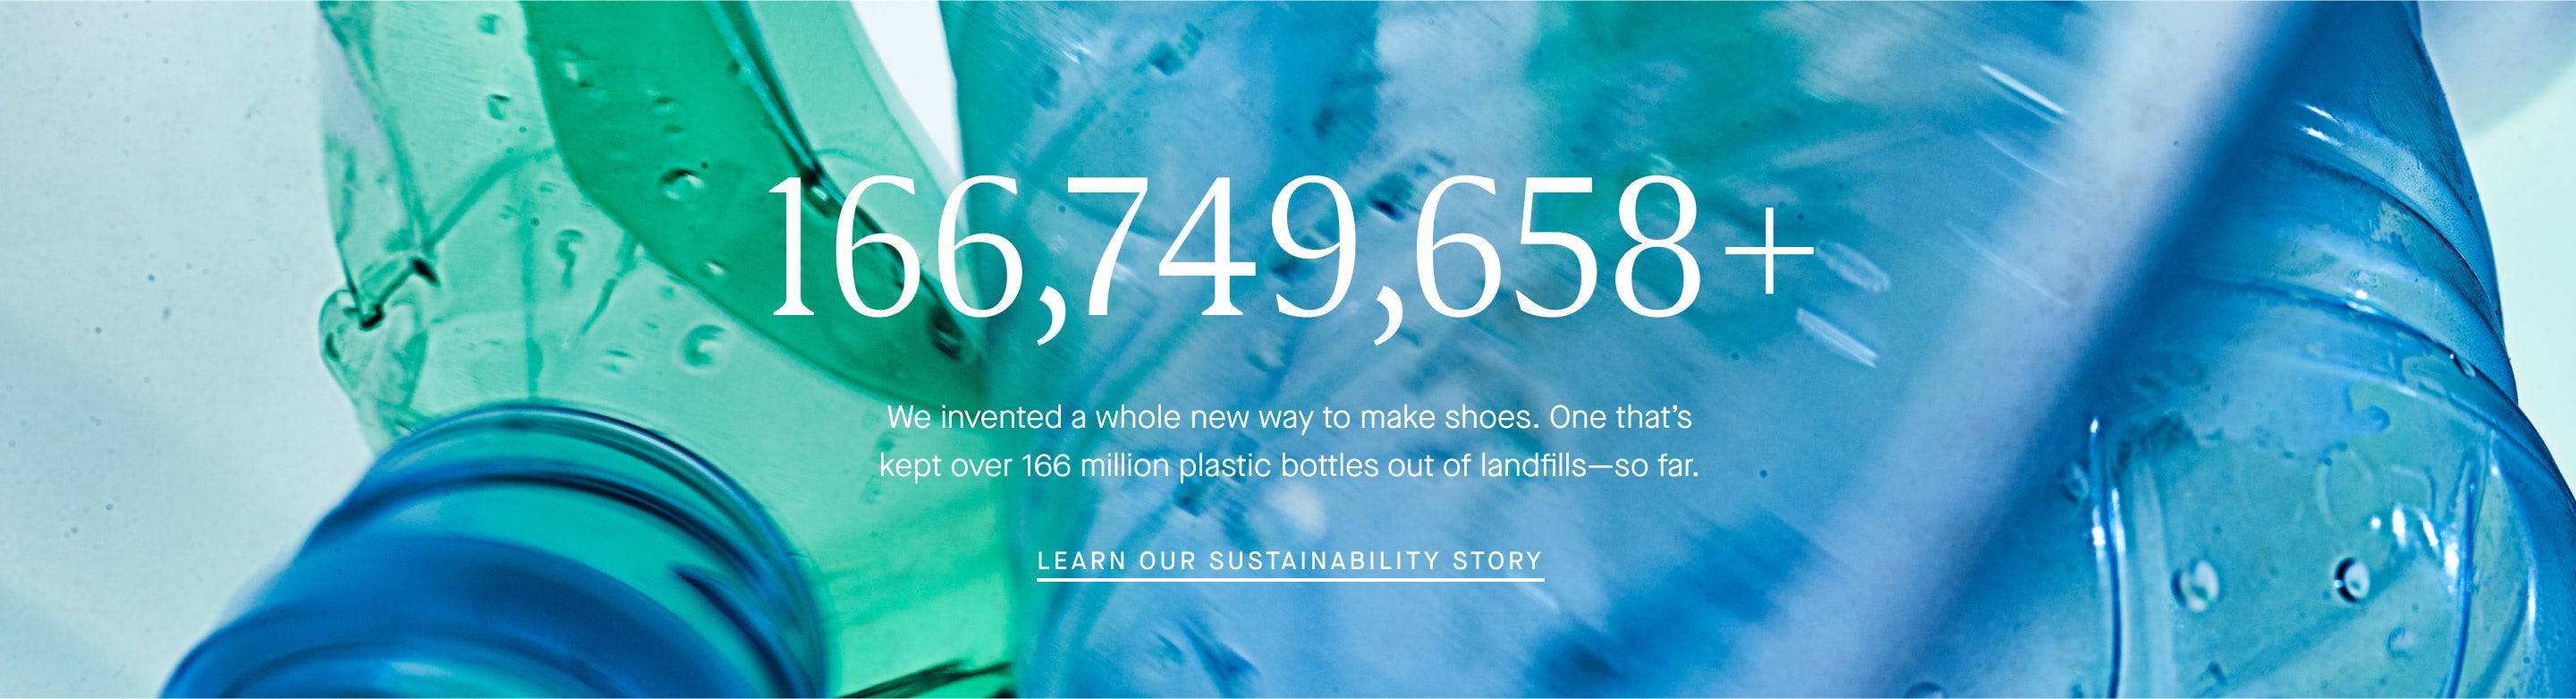 166,749,658+ We invented a whole new way to make shoes. One that's kept over 166 million plastic bottles out of landfills-so far. Learn Our Sustainability Story